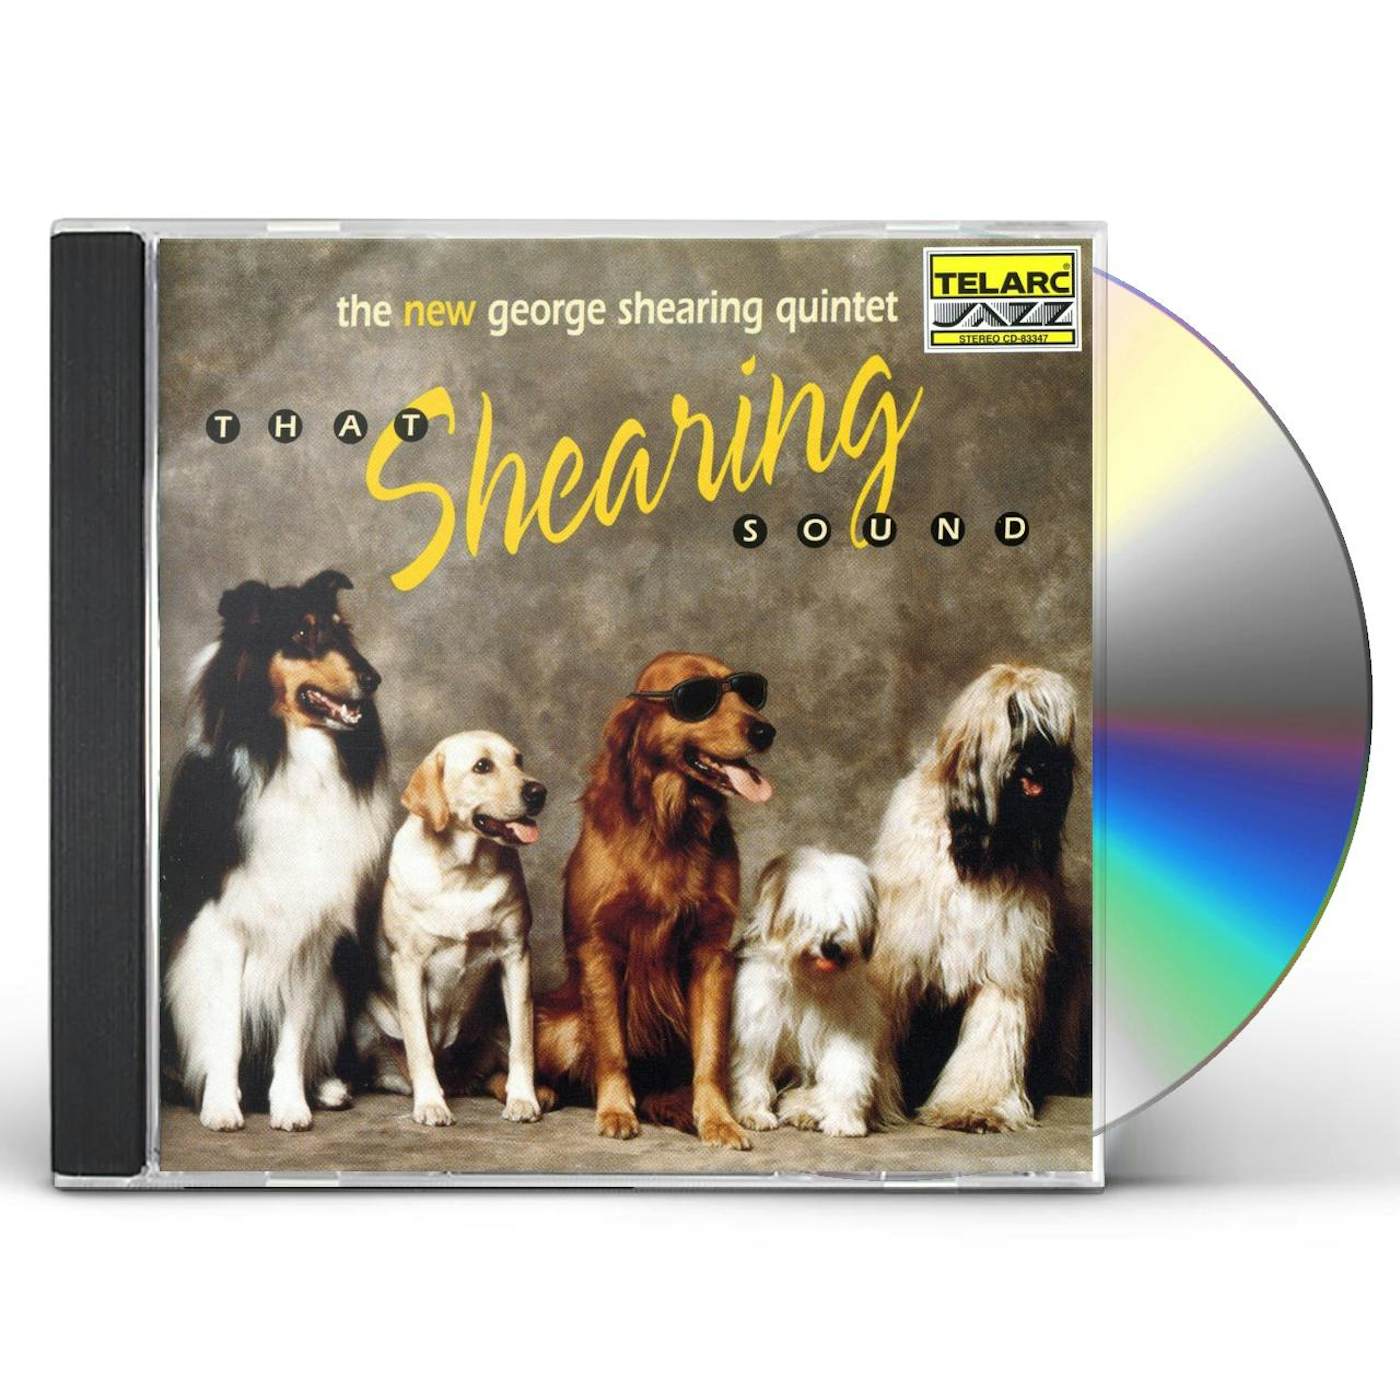 George Shearing ONCE AGAIN THAT SHEARING SOUND CD